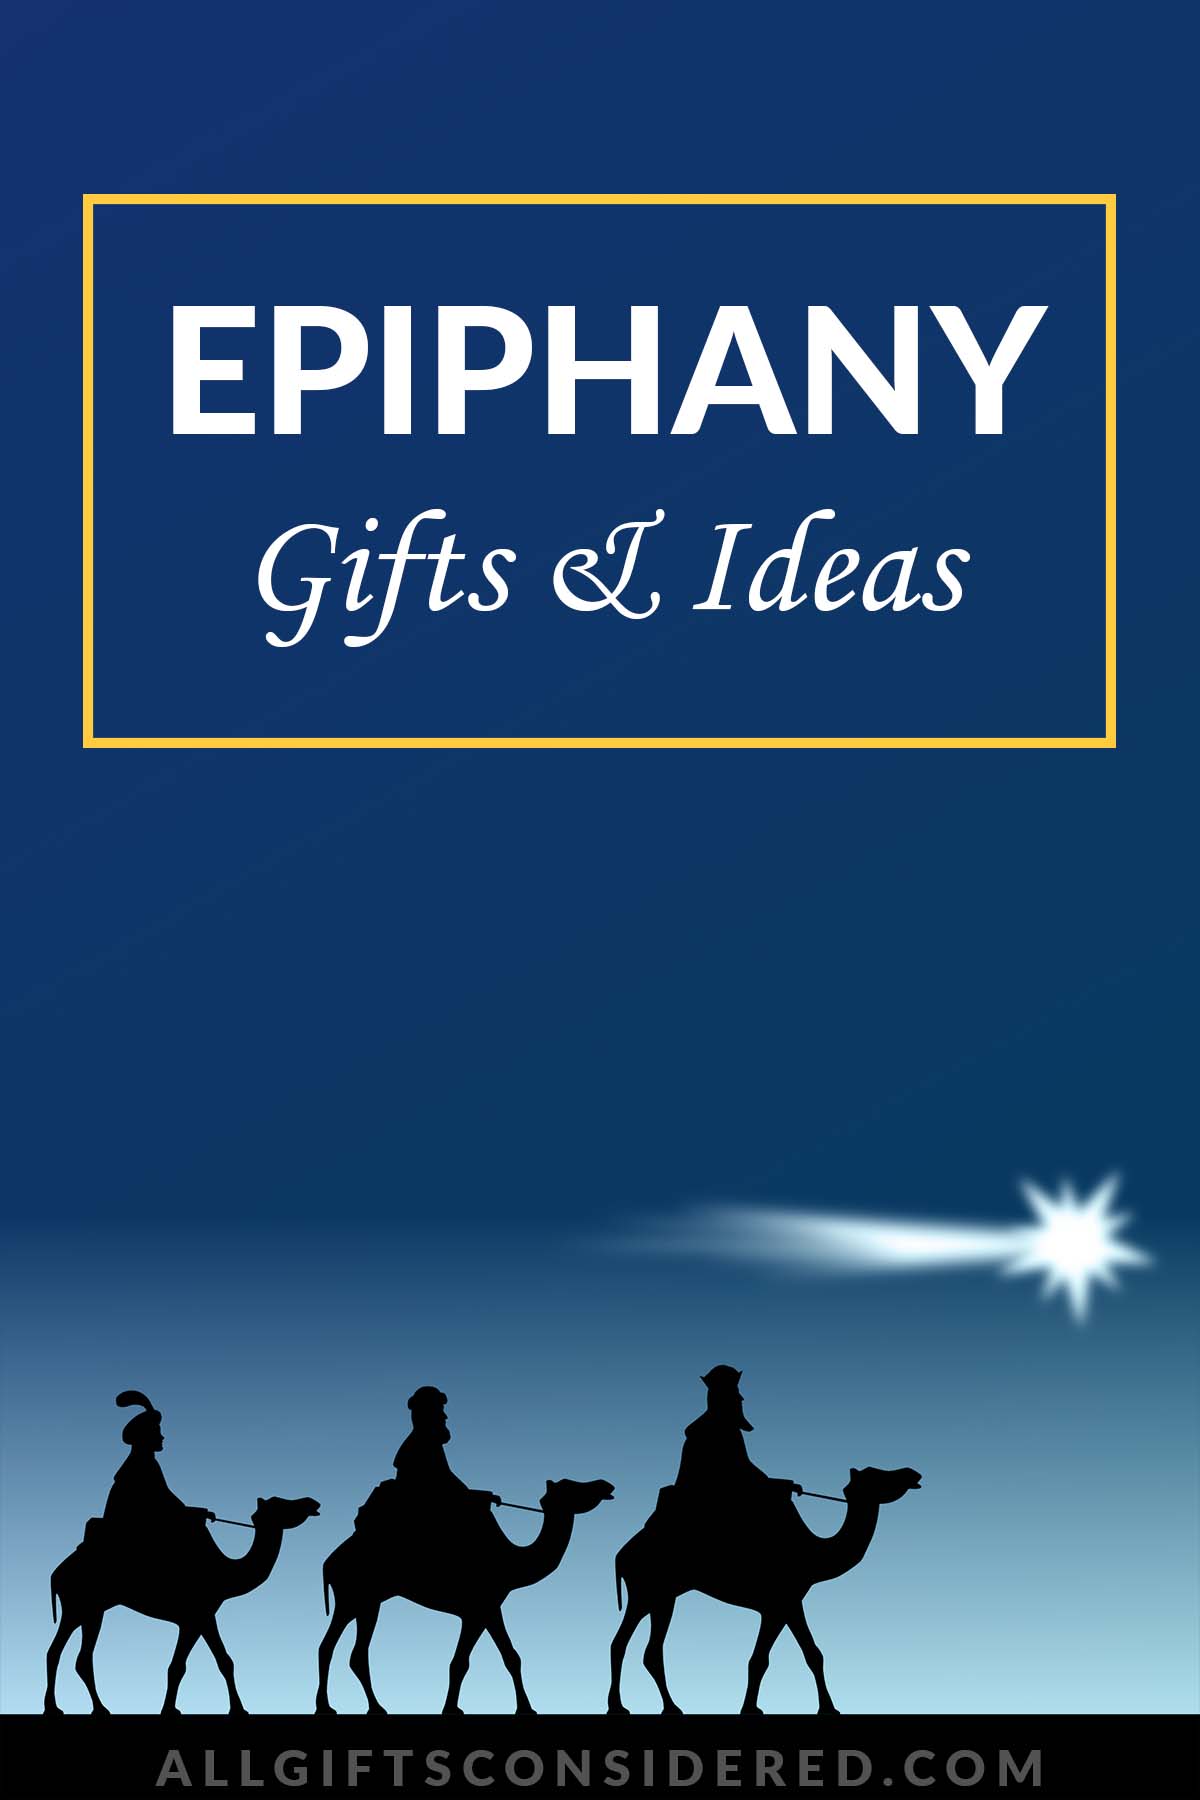 Epiphany gifts - feature image